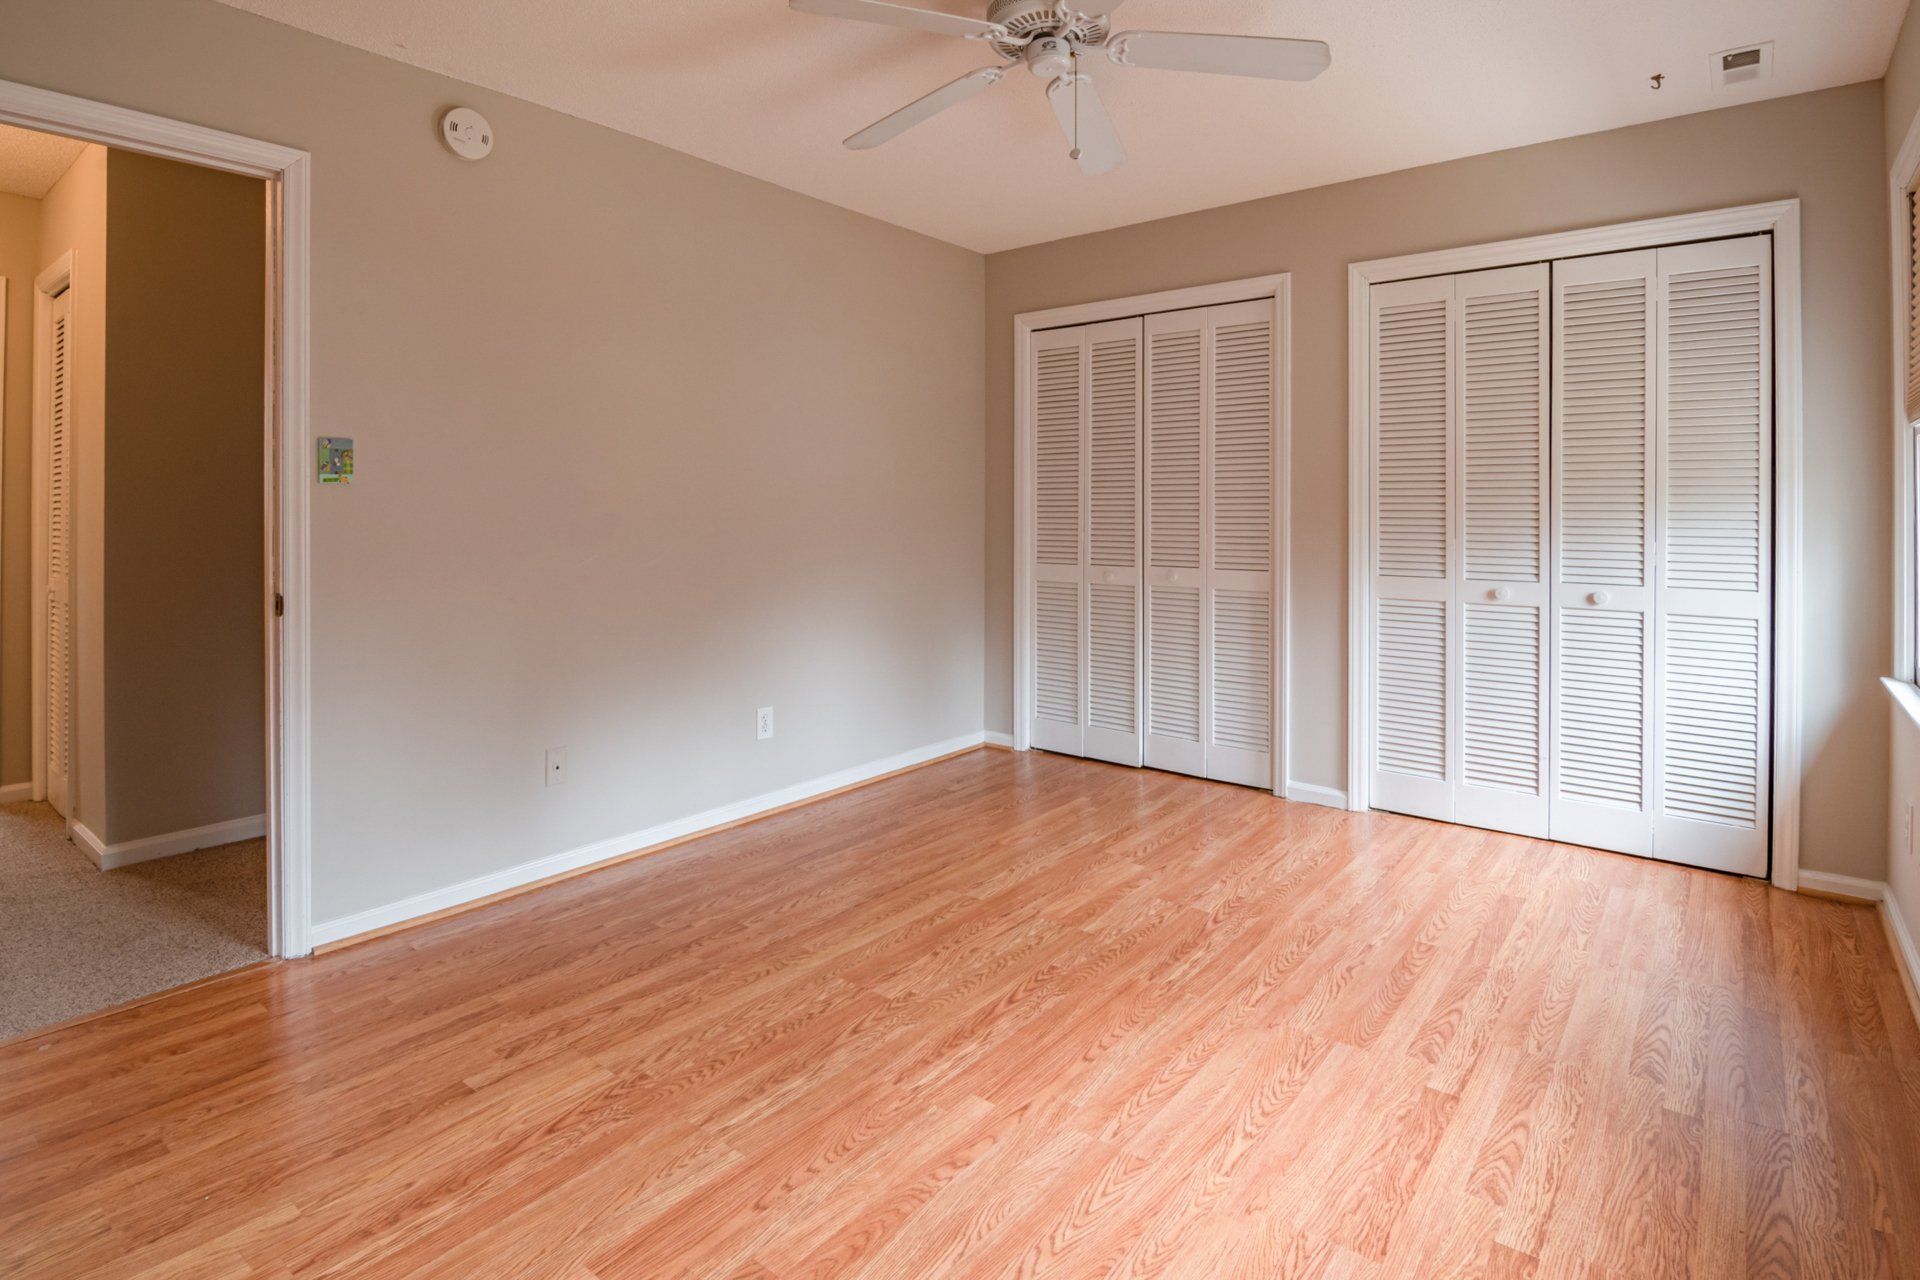 Bedroom with wood floors that were refinished by sanding and staining